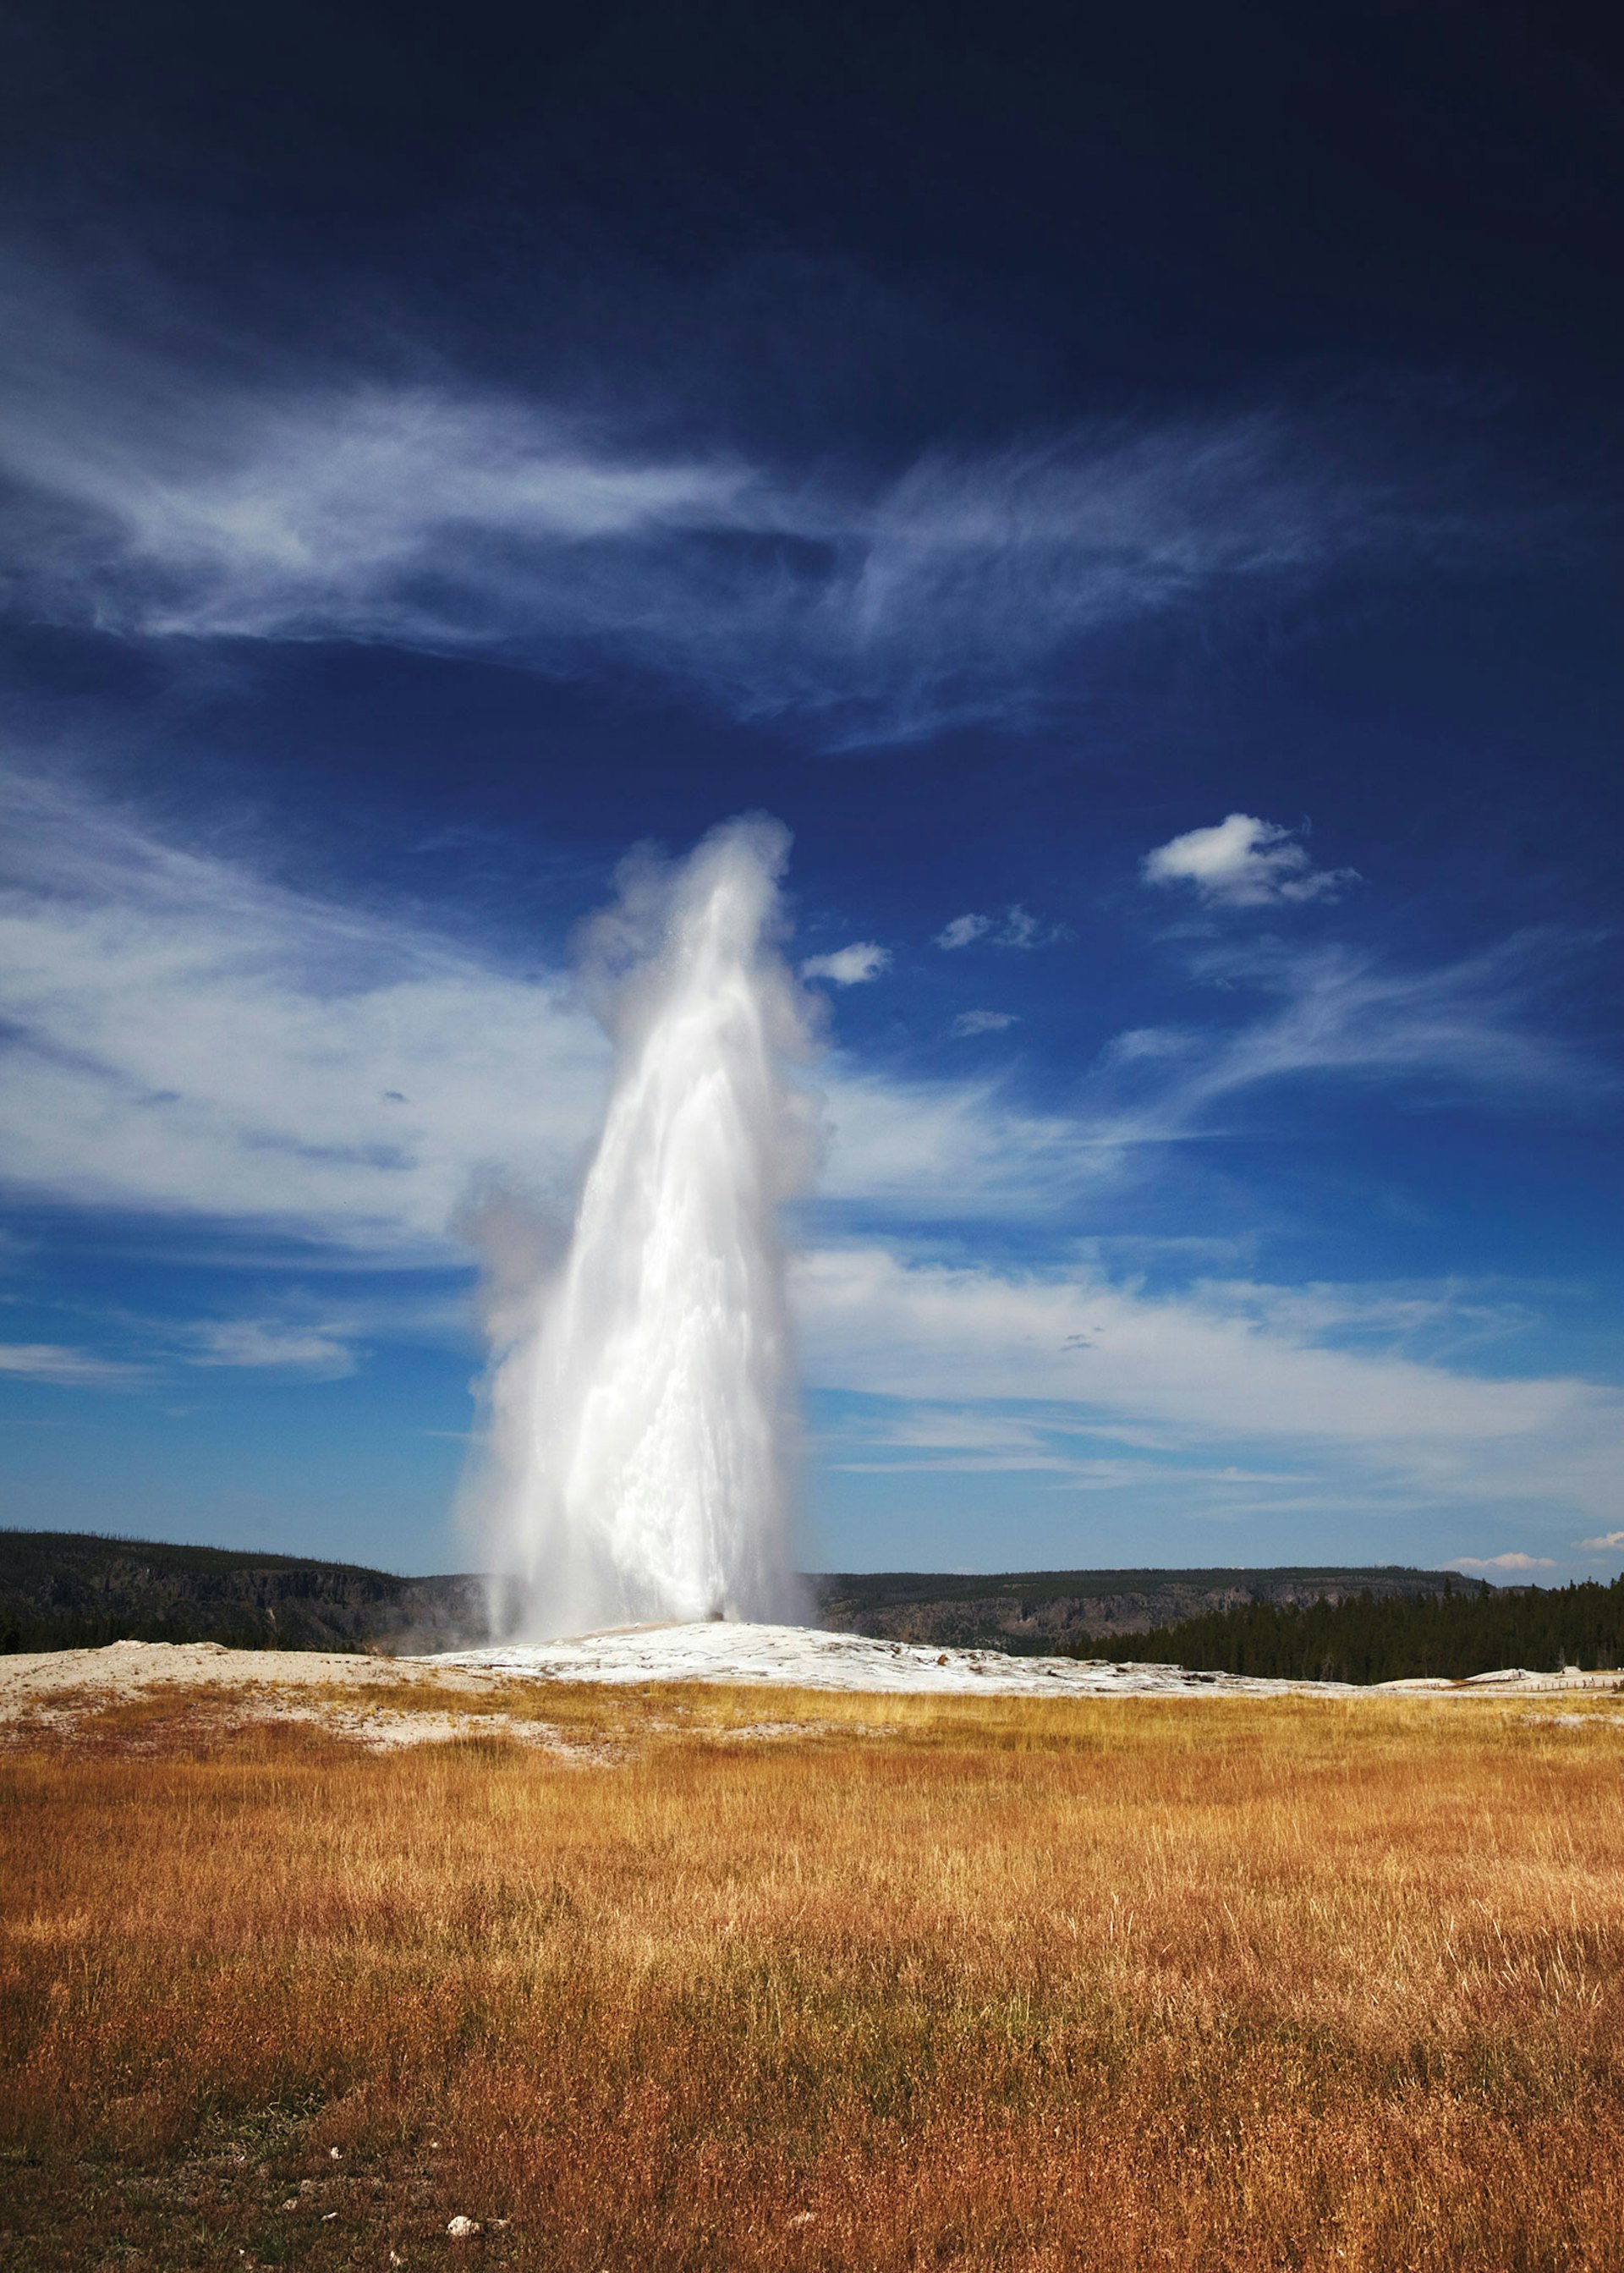 A plume of hot water erupts from Old Faithful, the most famous geyser in Yellowstone National Park © Matt Munro / Lonely Planet